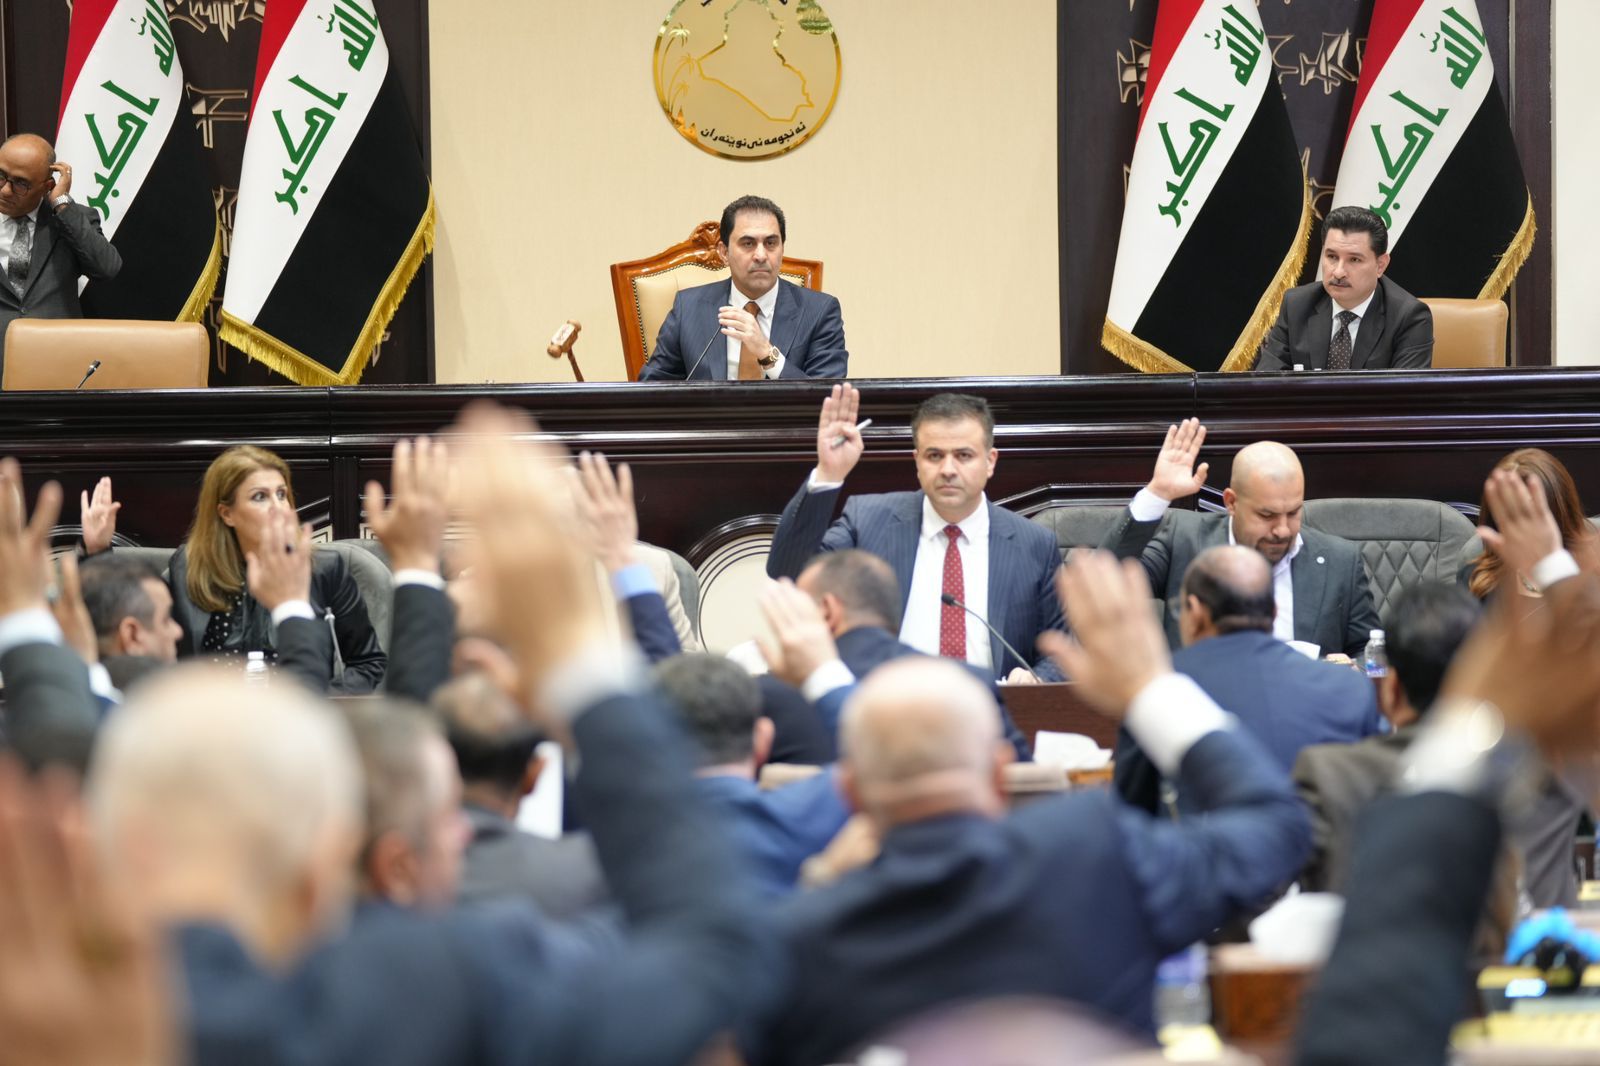 Over 100 bills stalled in Iraq's parliament, MP says